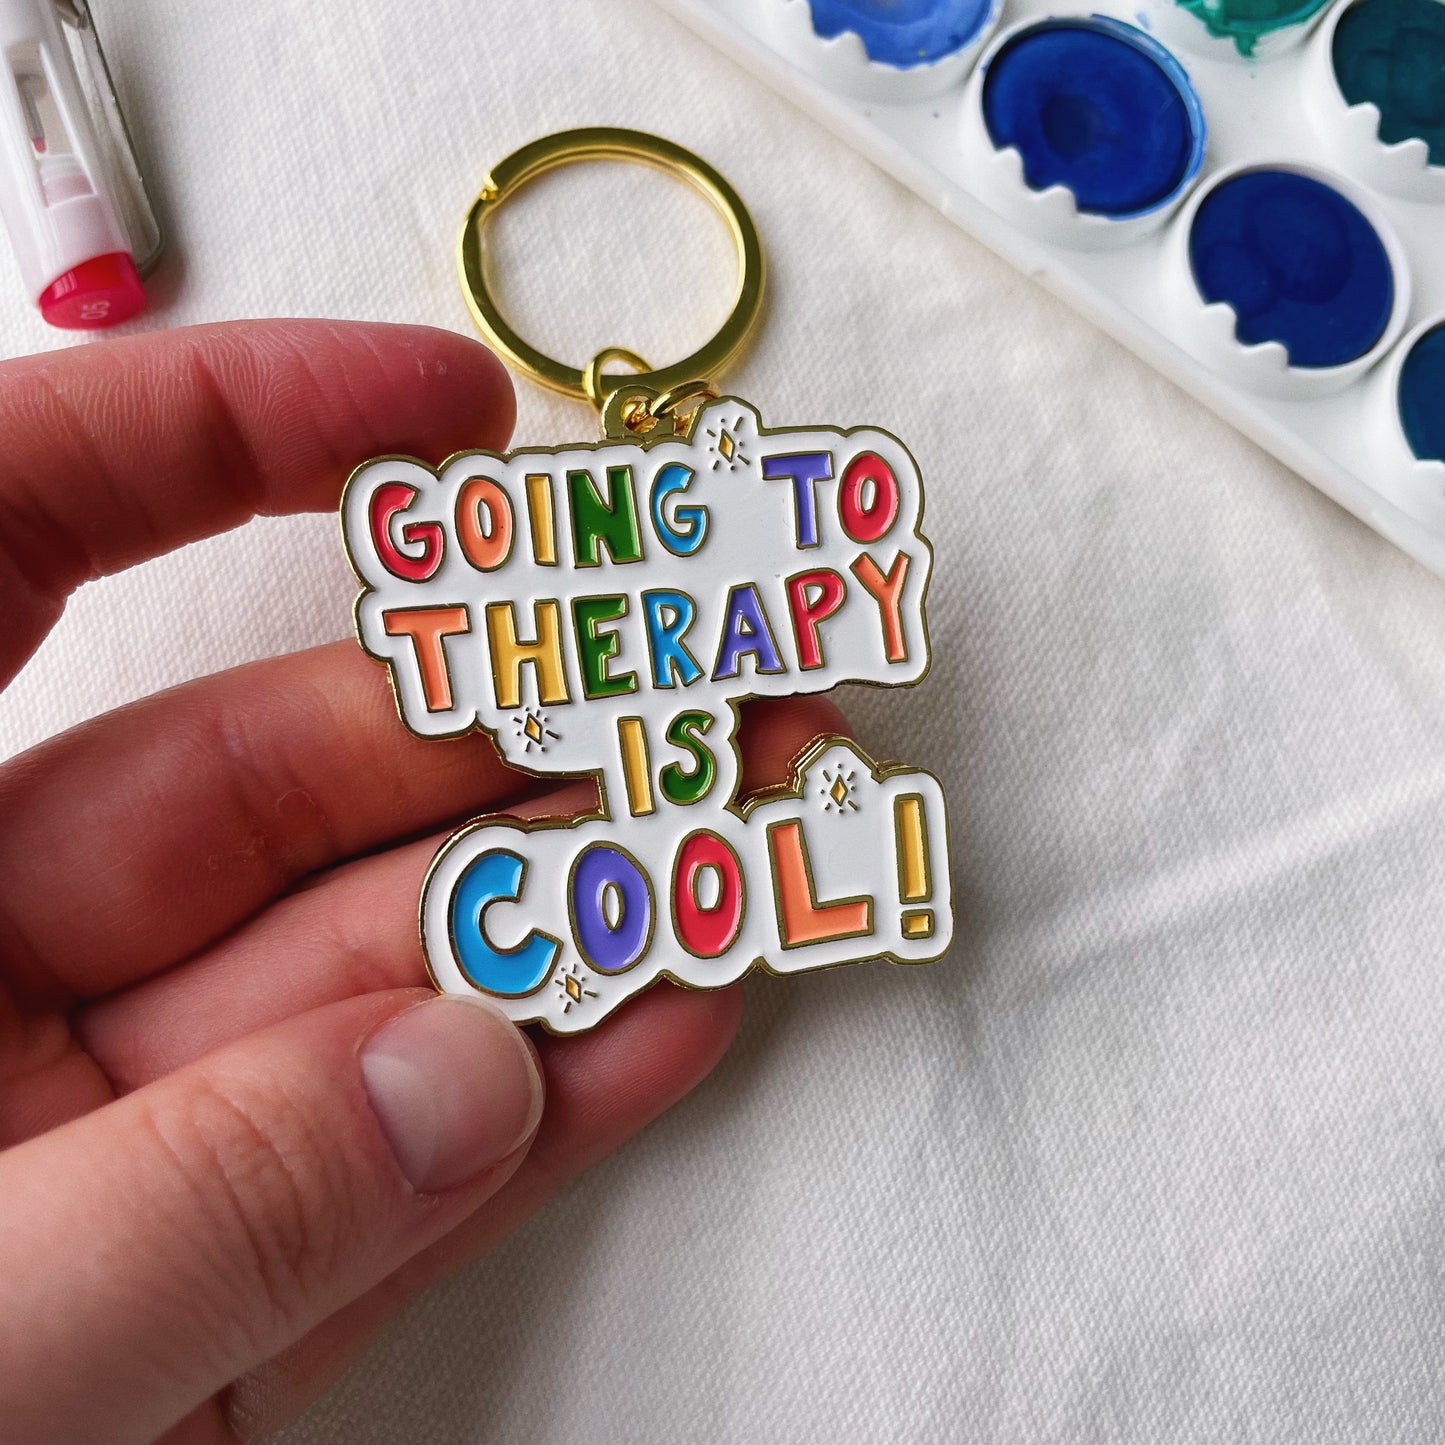 Going To Therapy Is Cool! - Gold Keychain